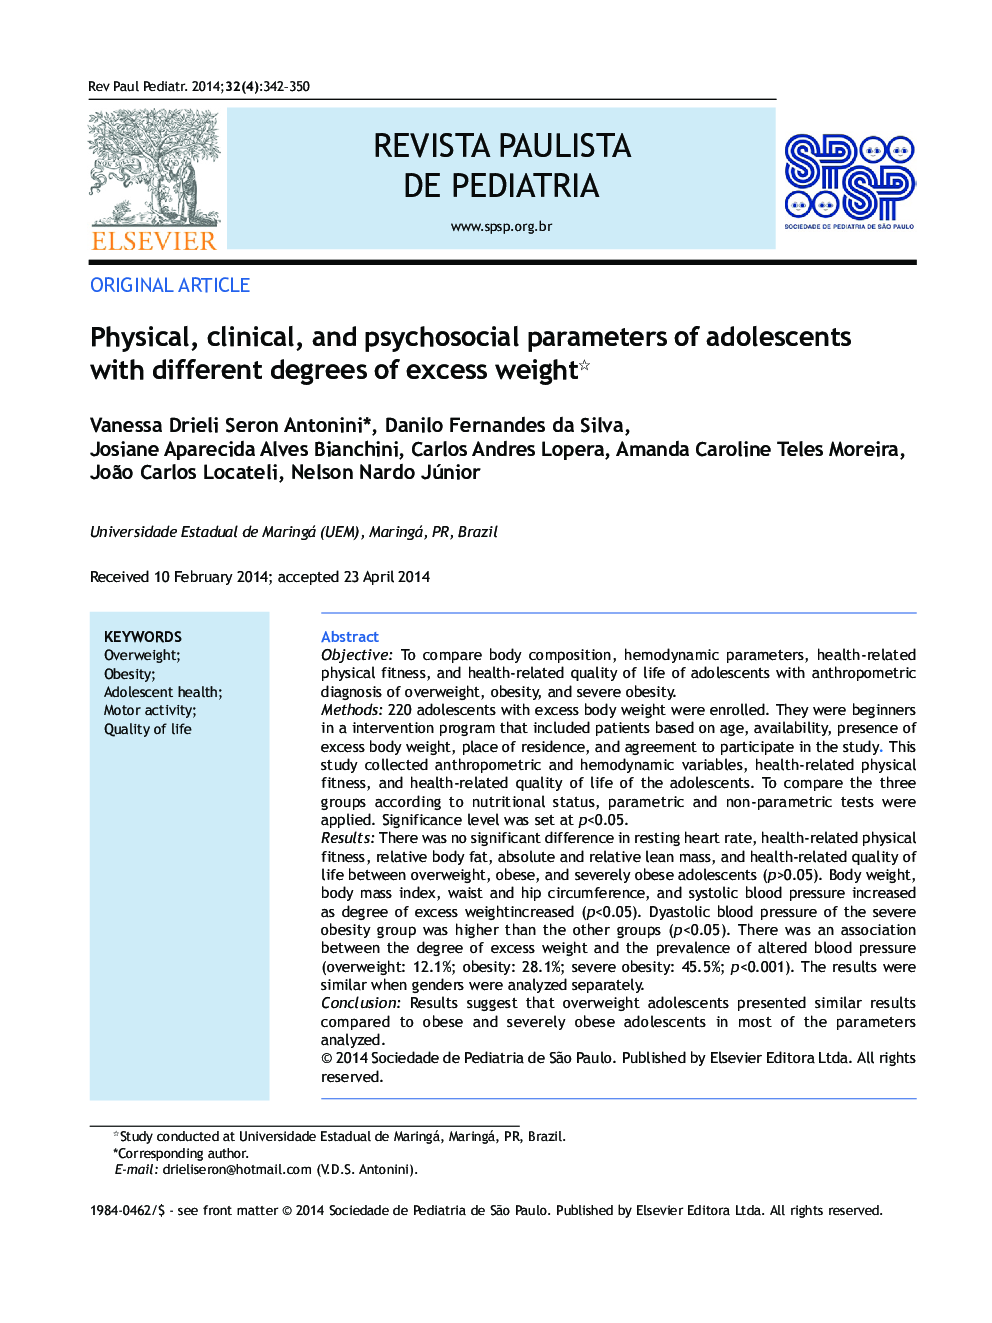 Physical, clinical, and psychosocial parameters of adolescents with different degrees of excess weight*